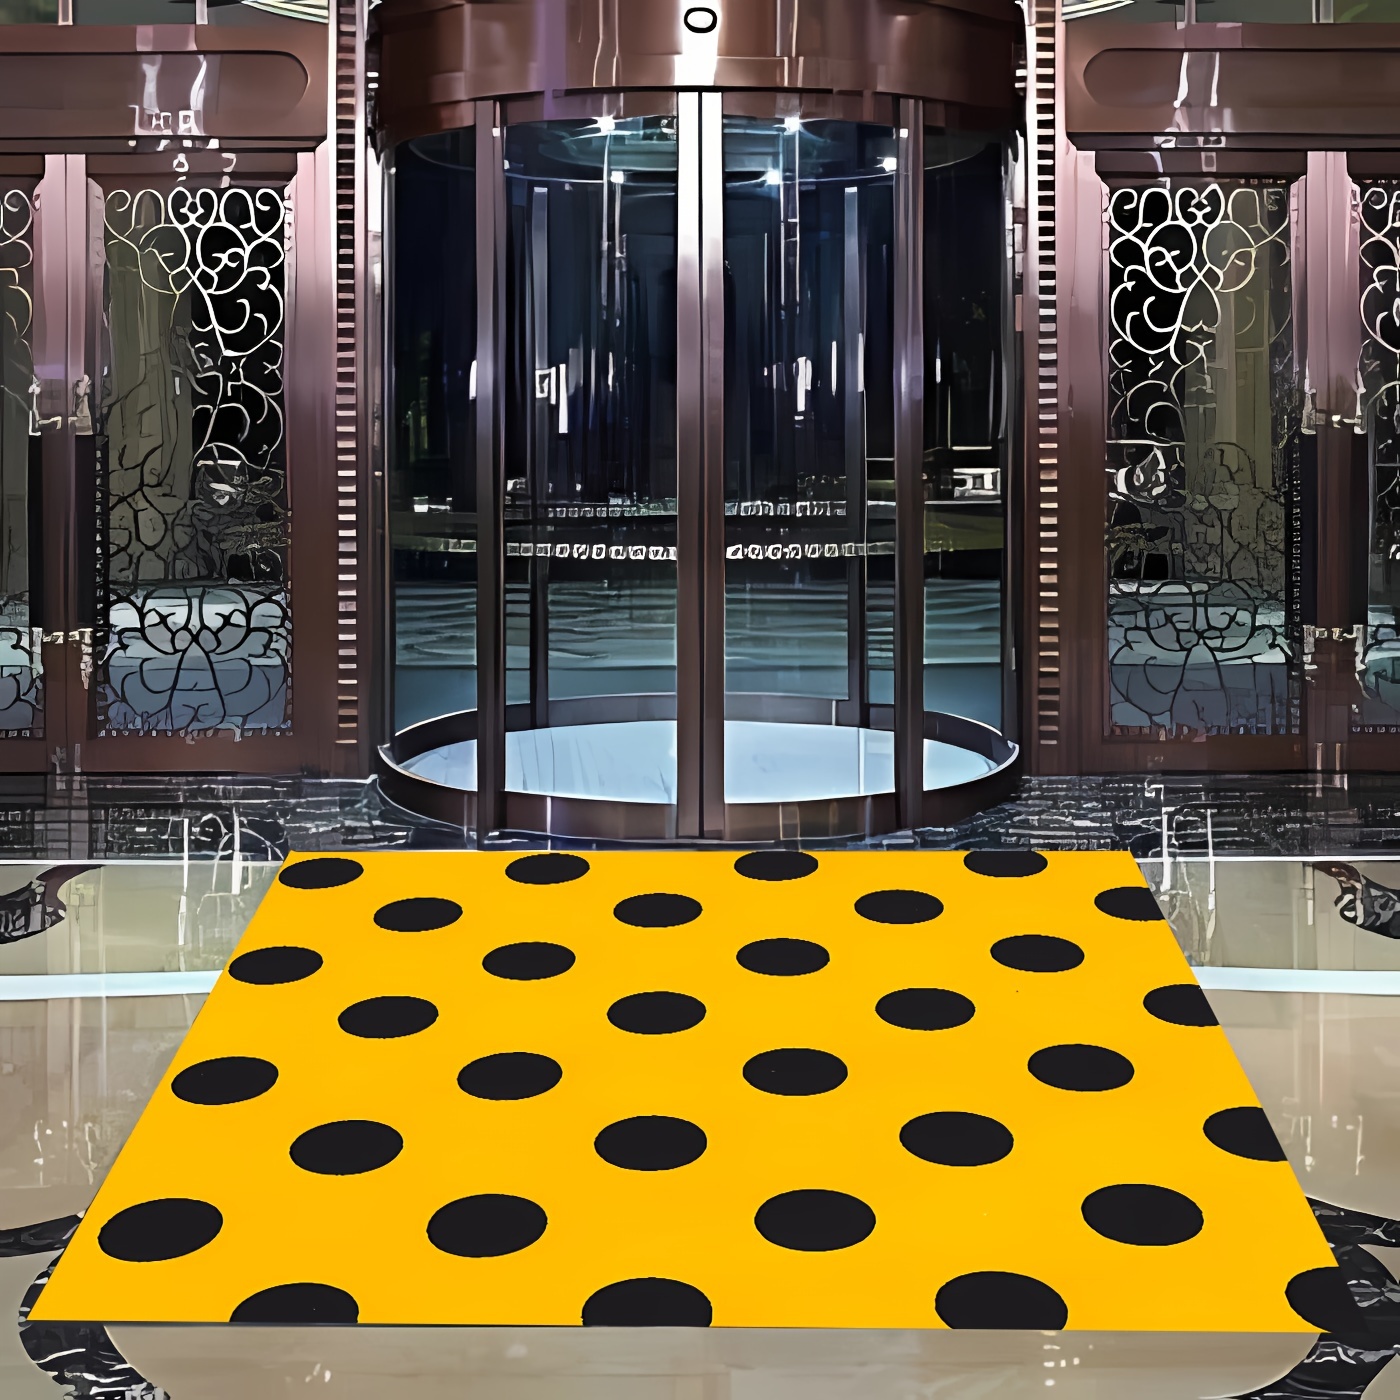 

1pc Yellow Background Black Spot Patterned Carpet, Non Slip Kitchen Mat, Living Room And Bedroom Decorative Carpet, Corridor Carpet, Suitable For Hotel/commercial Space